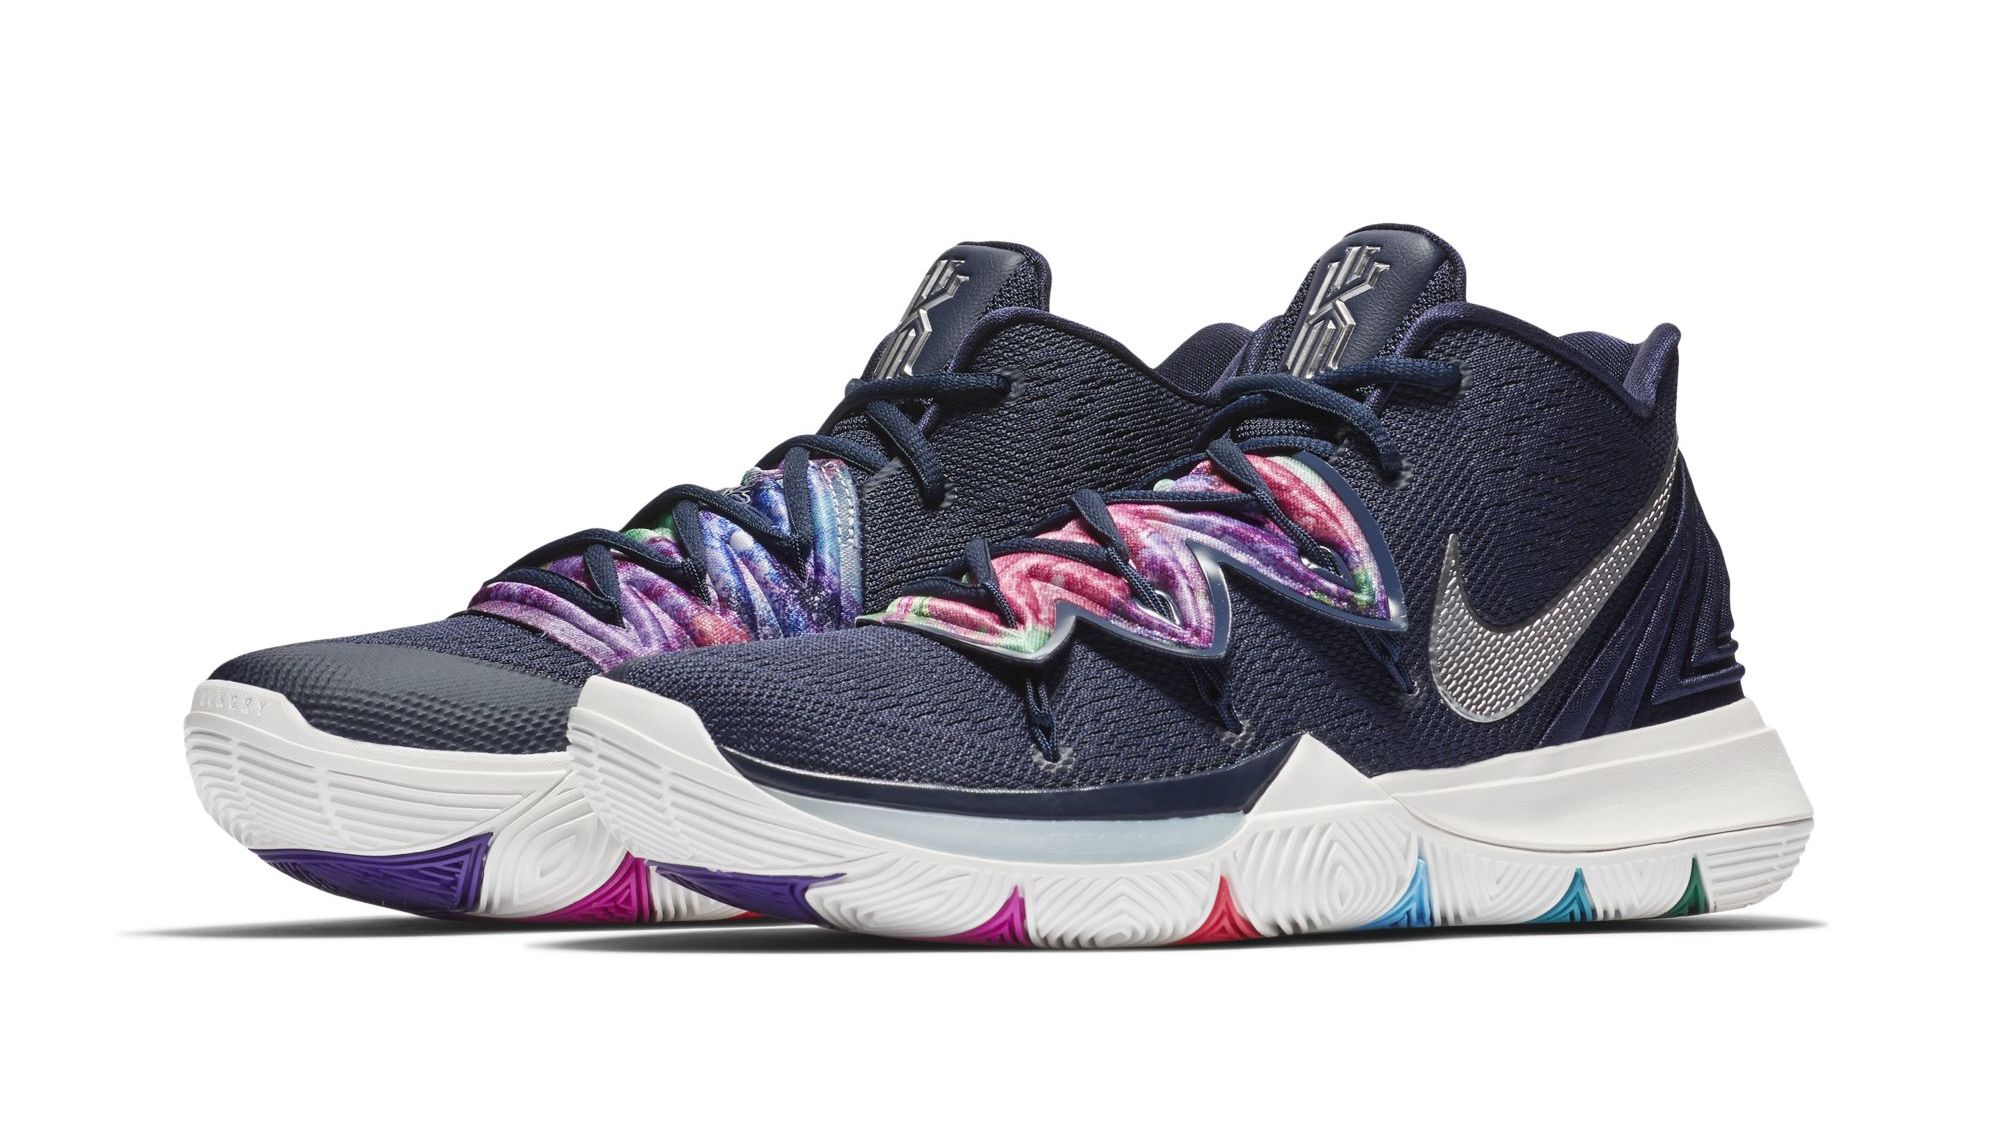 kyrie 5 launch date